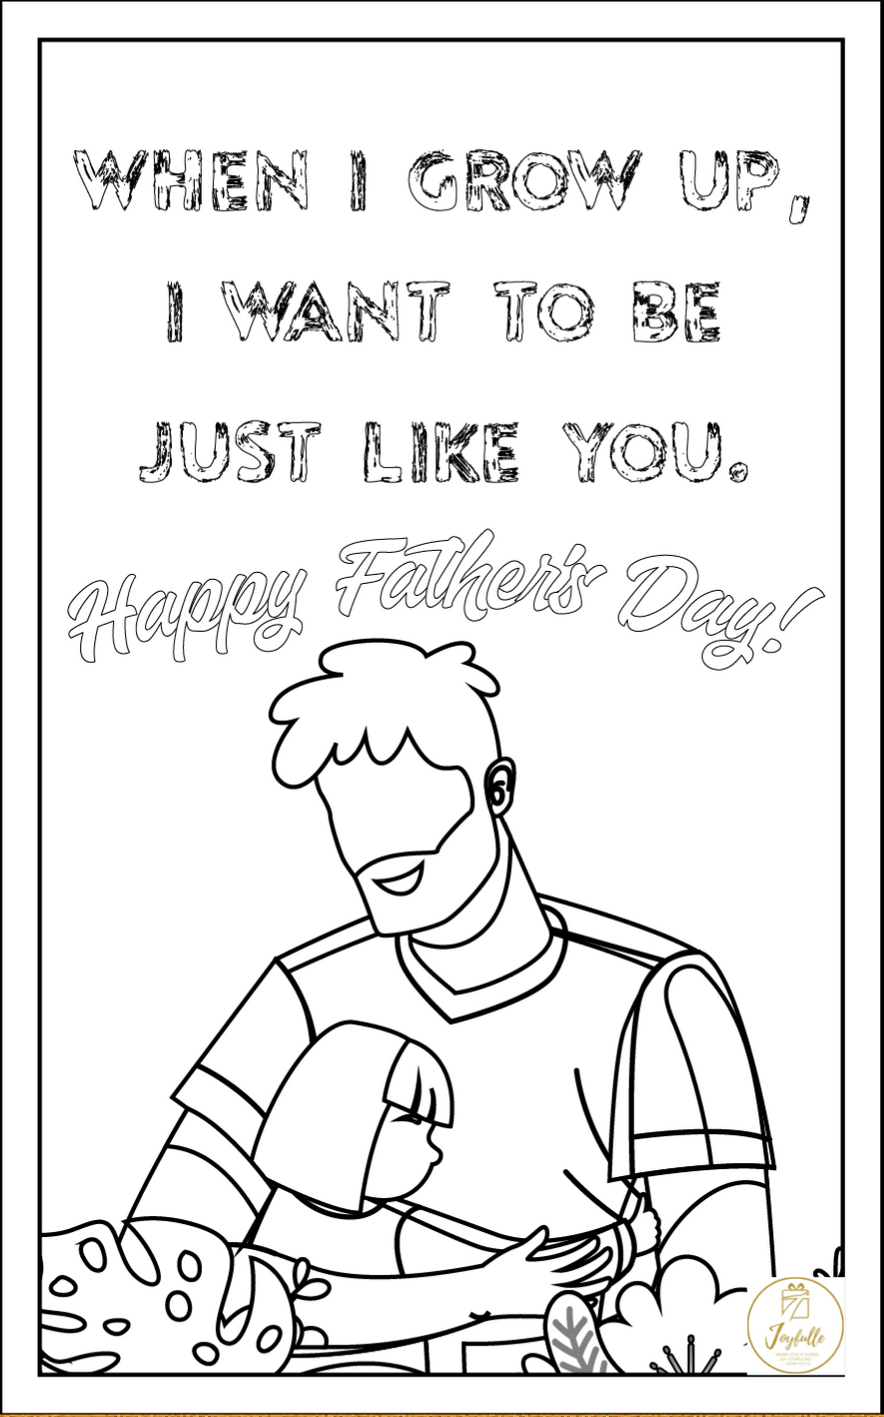 Father's Day Greeting Card 12